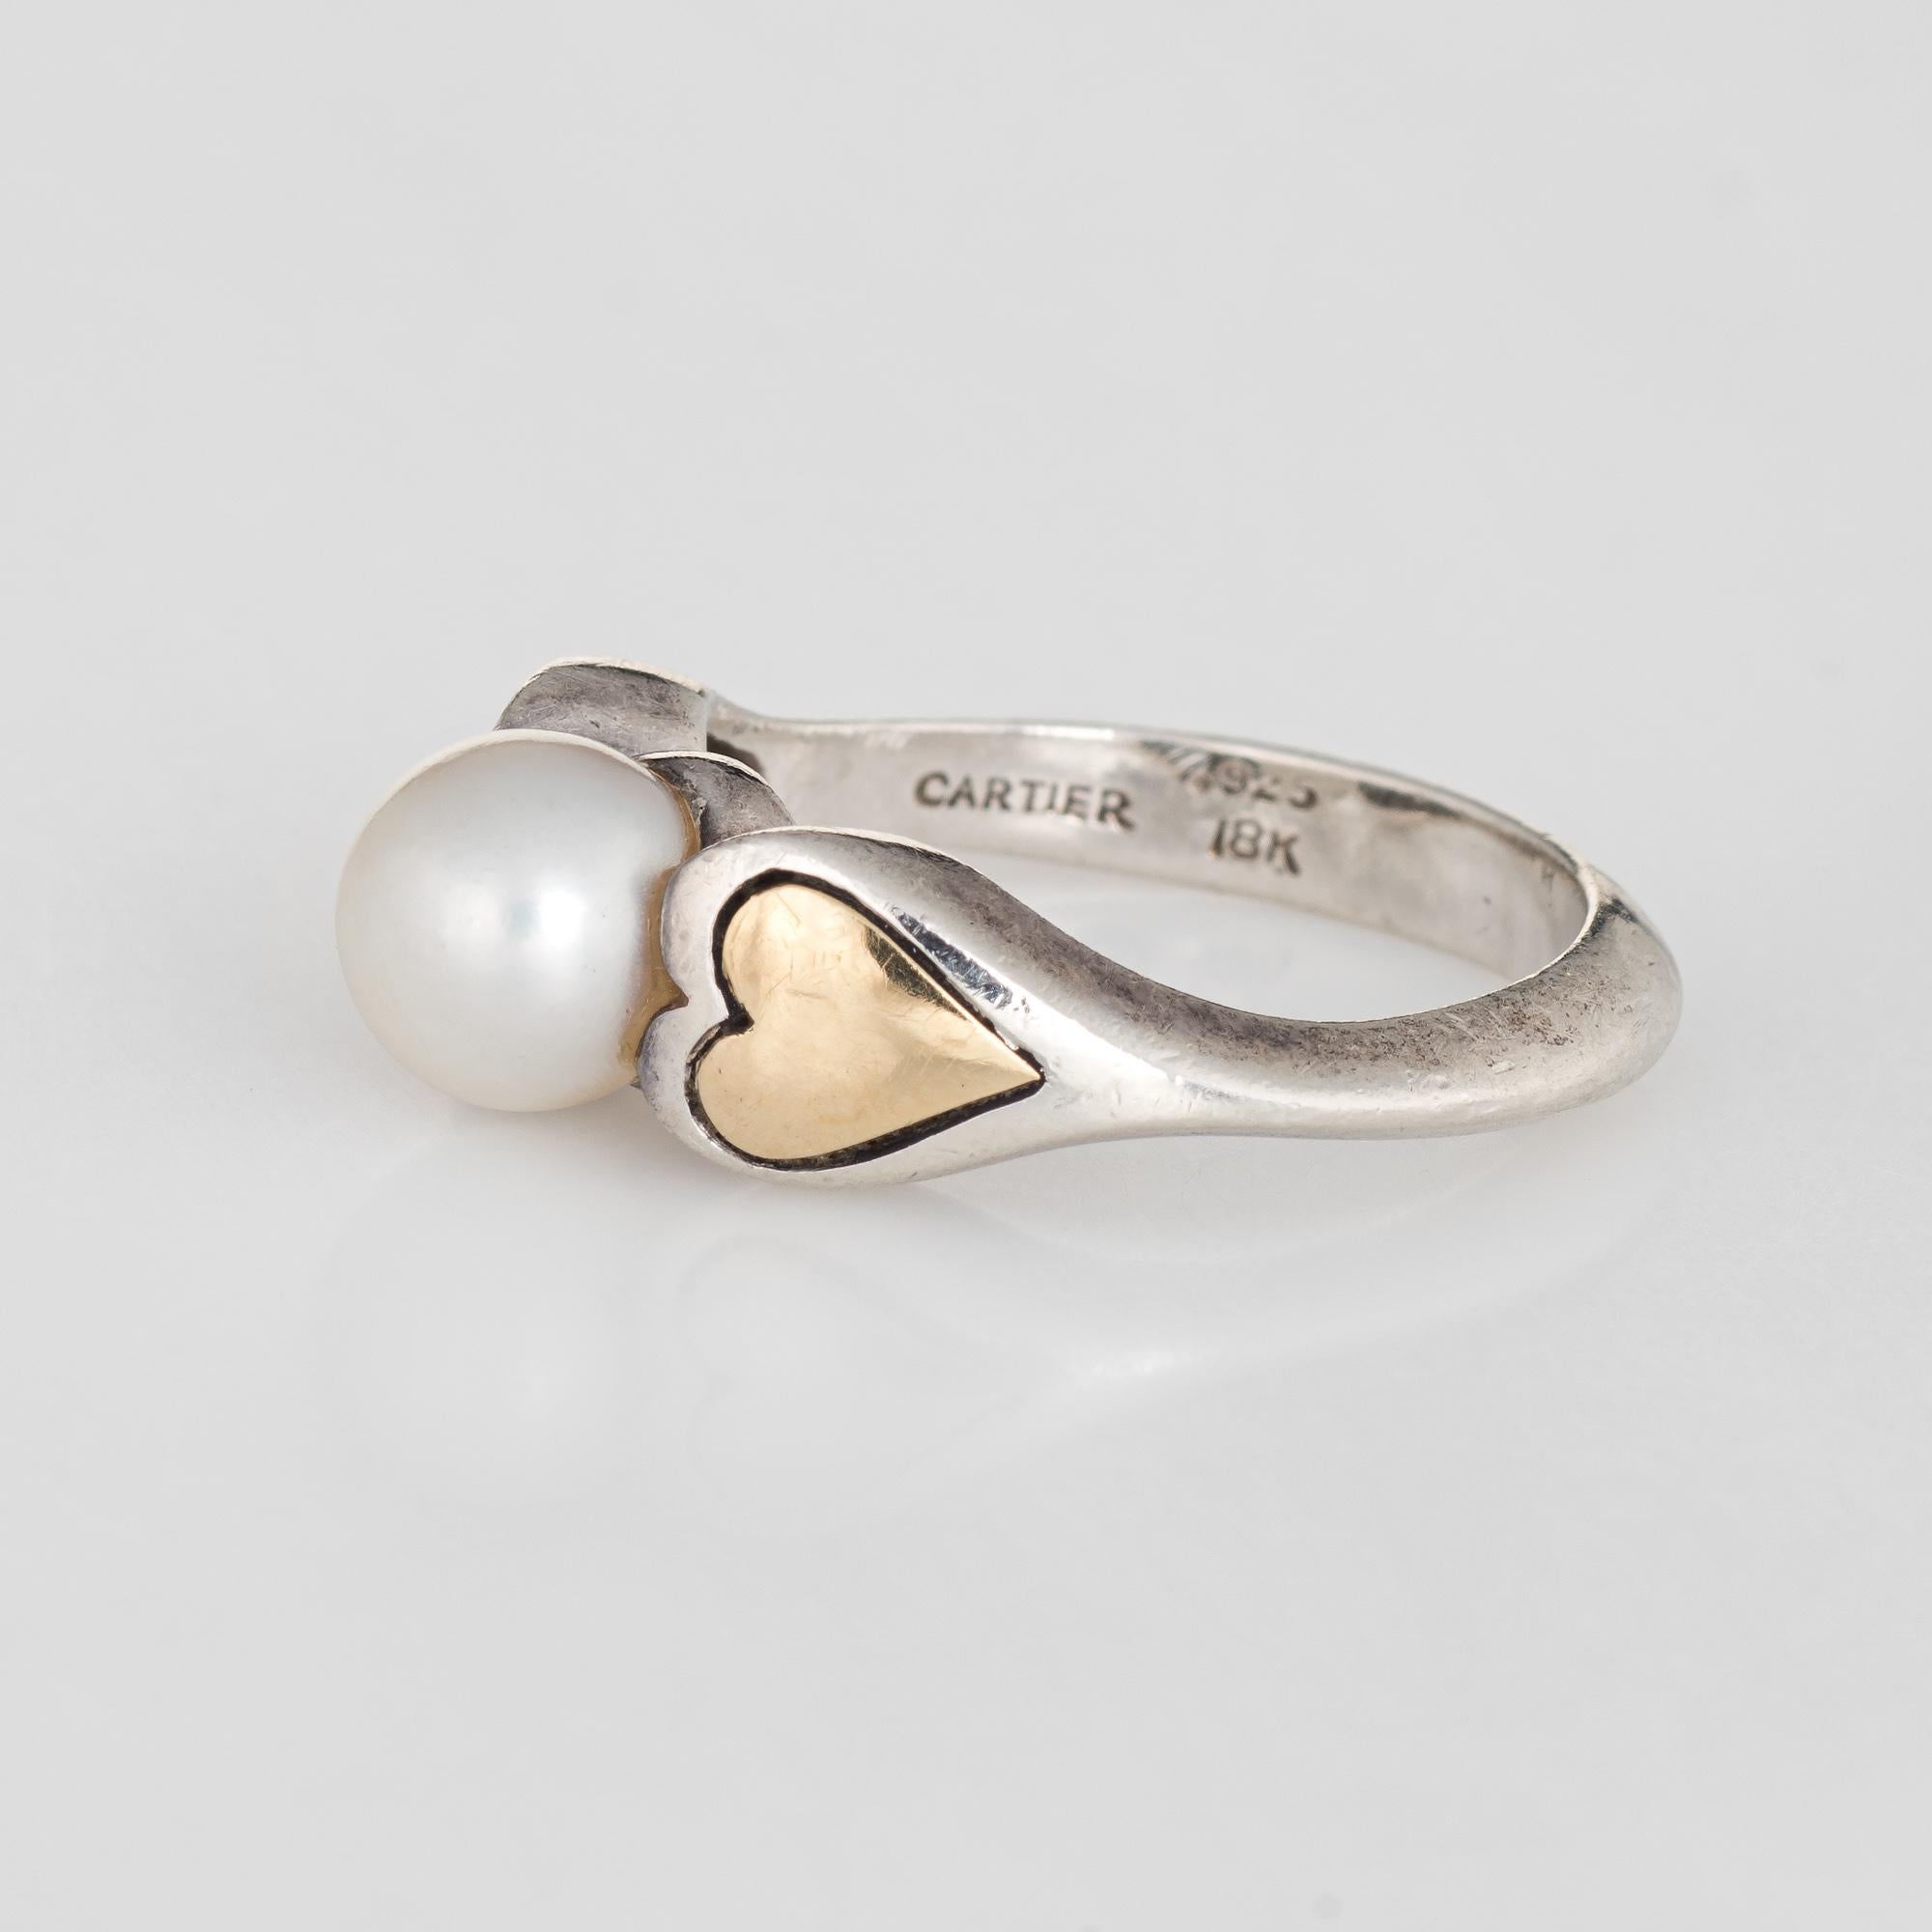 Round Cut Cartier Cultured Pearl Ring Hearts 18 Karat Gold Sterling Silver 5.25 Estate